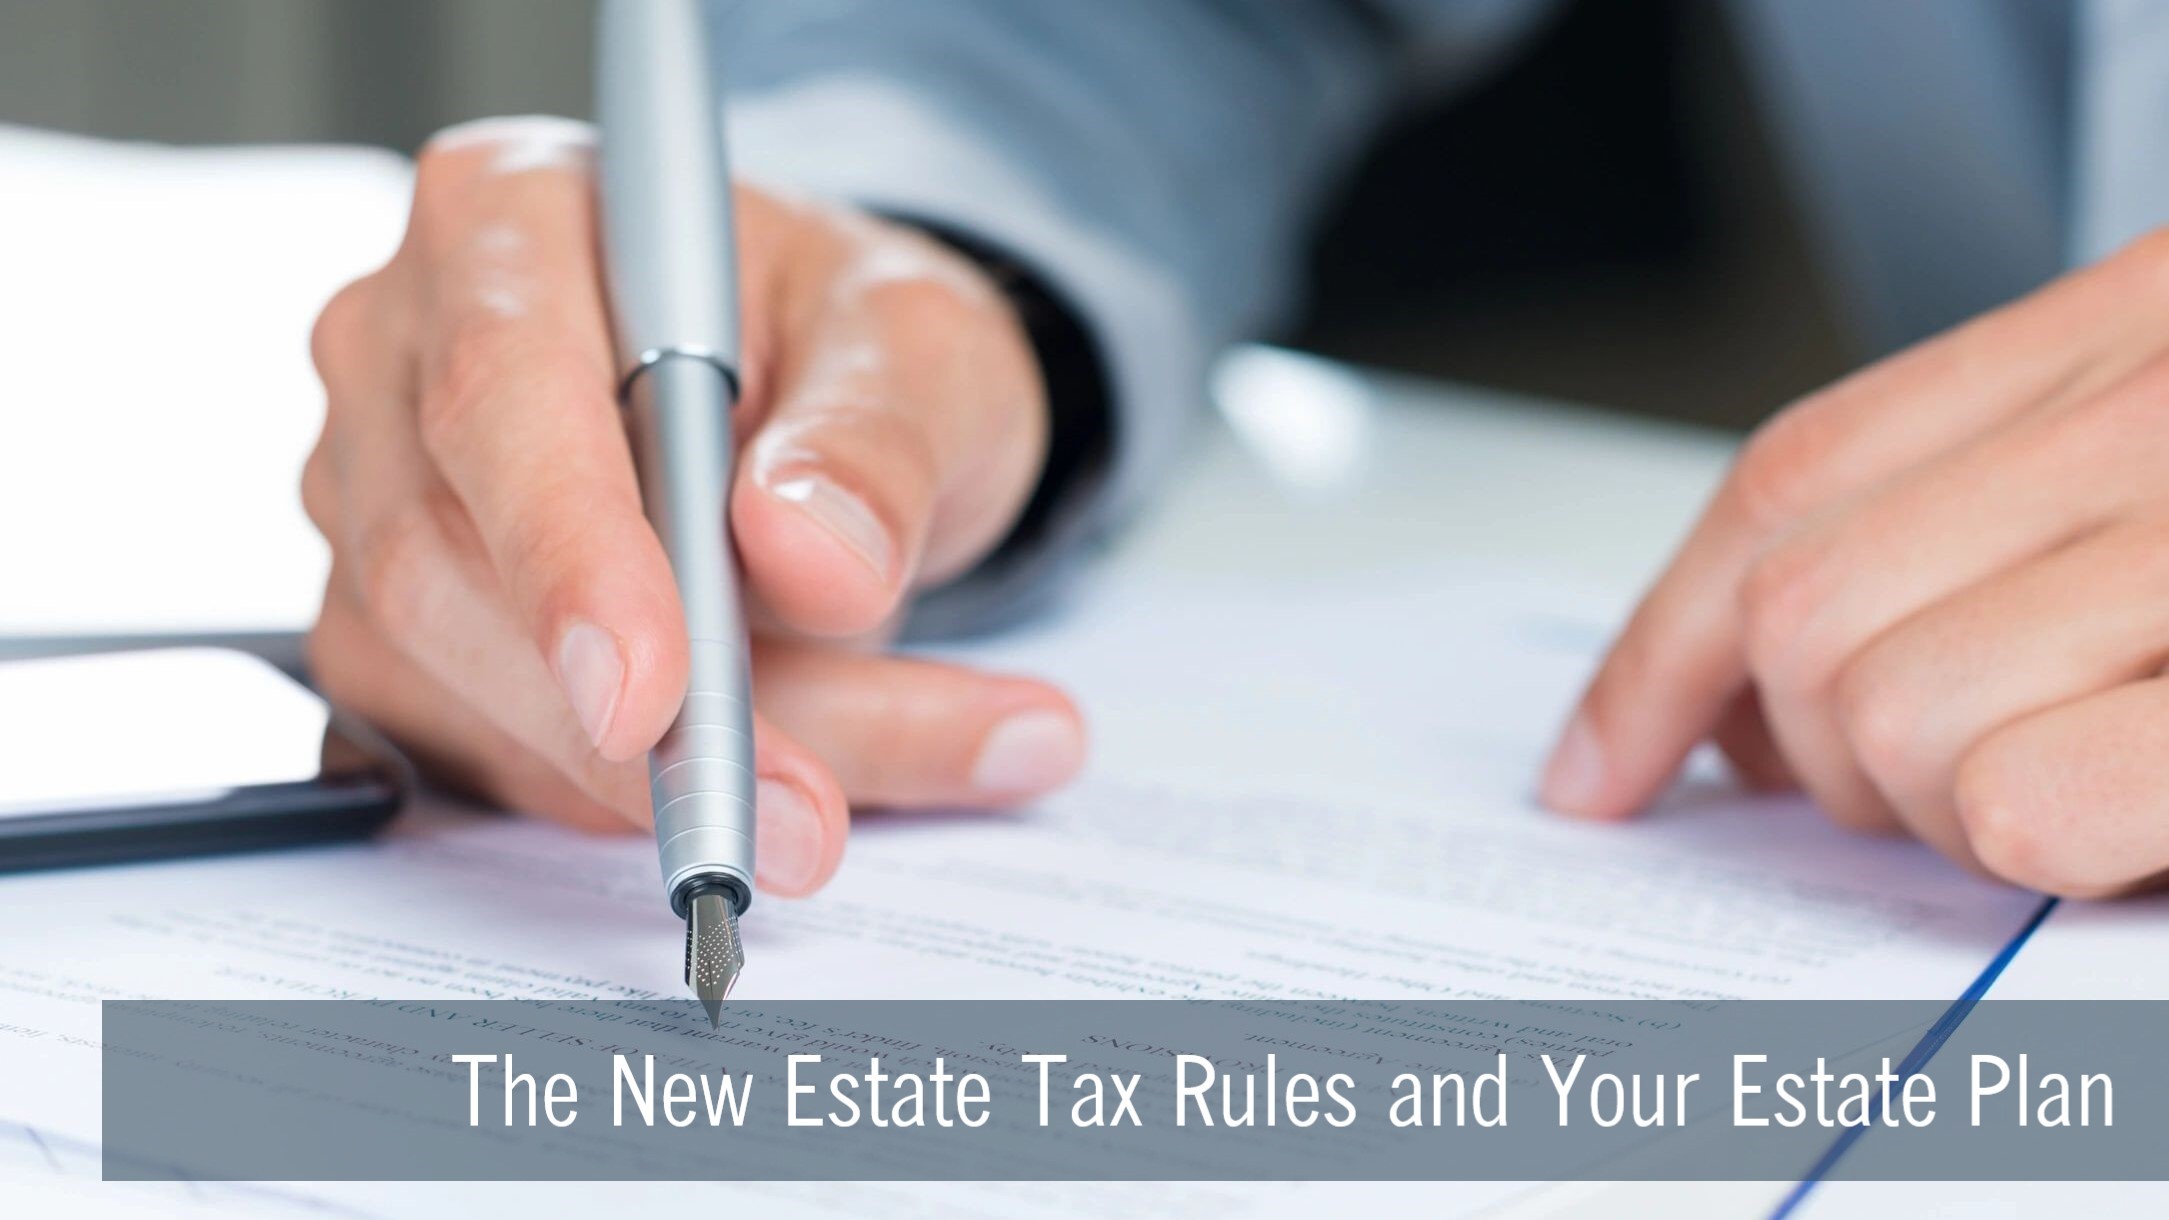 The New Estate Tax Rules and Your Estate Plan